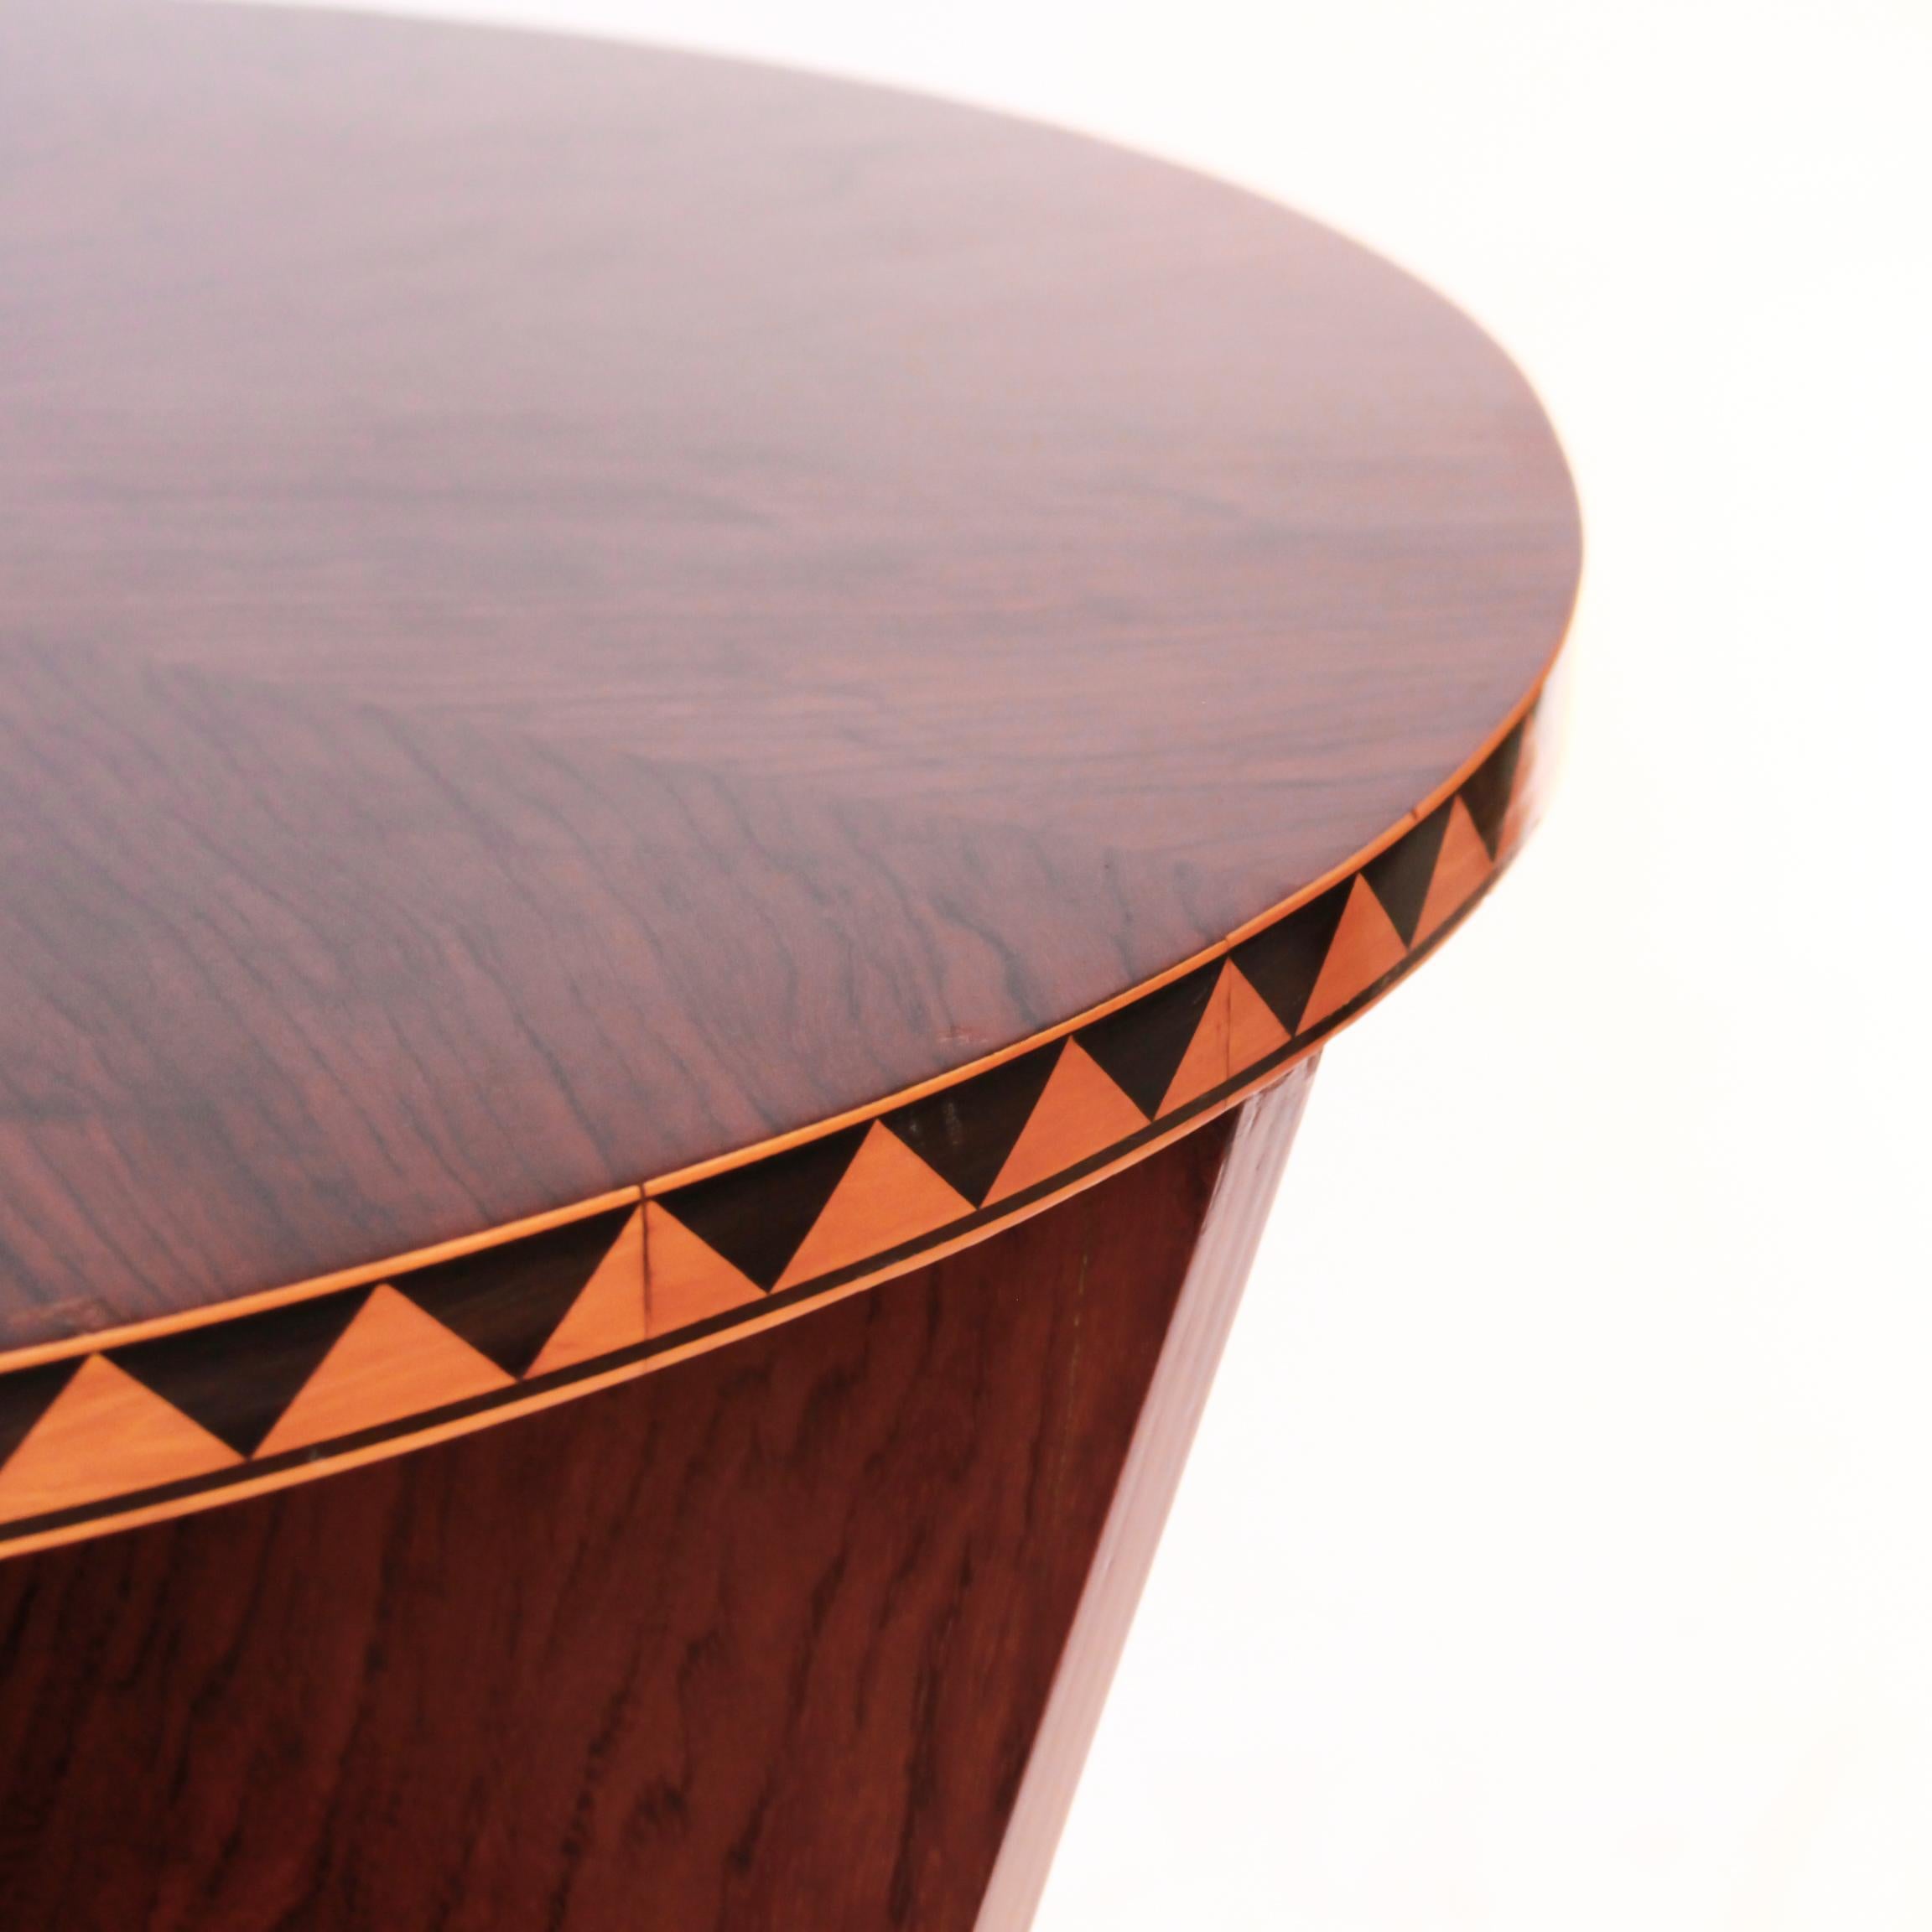 English Art Deco French Conical Library Table in Walnut Veneer Circa 1935